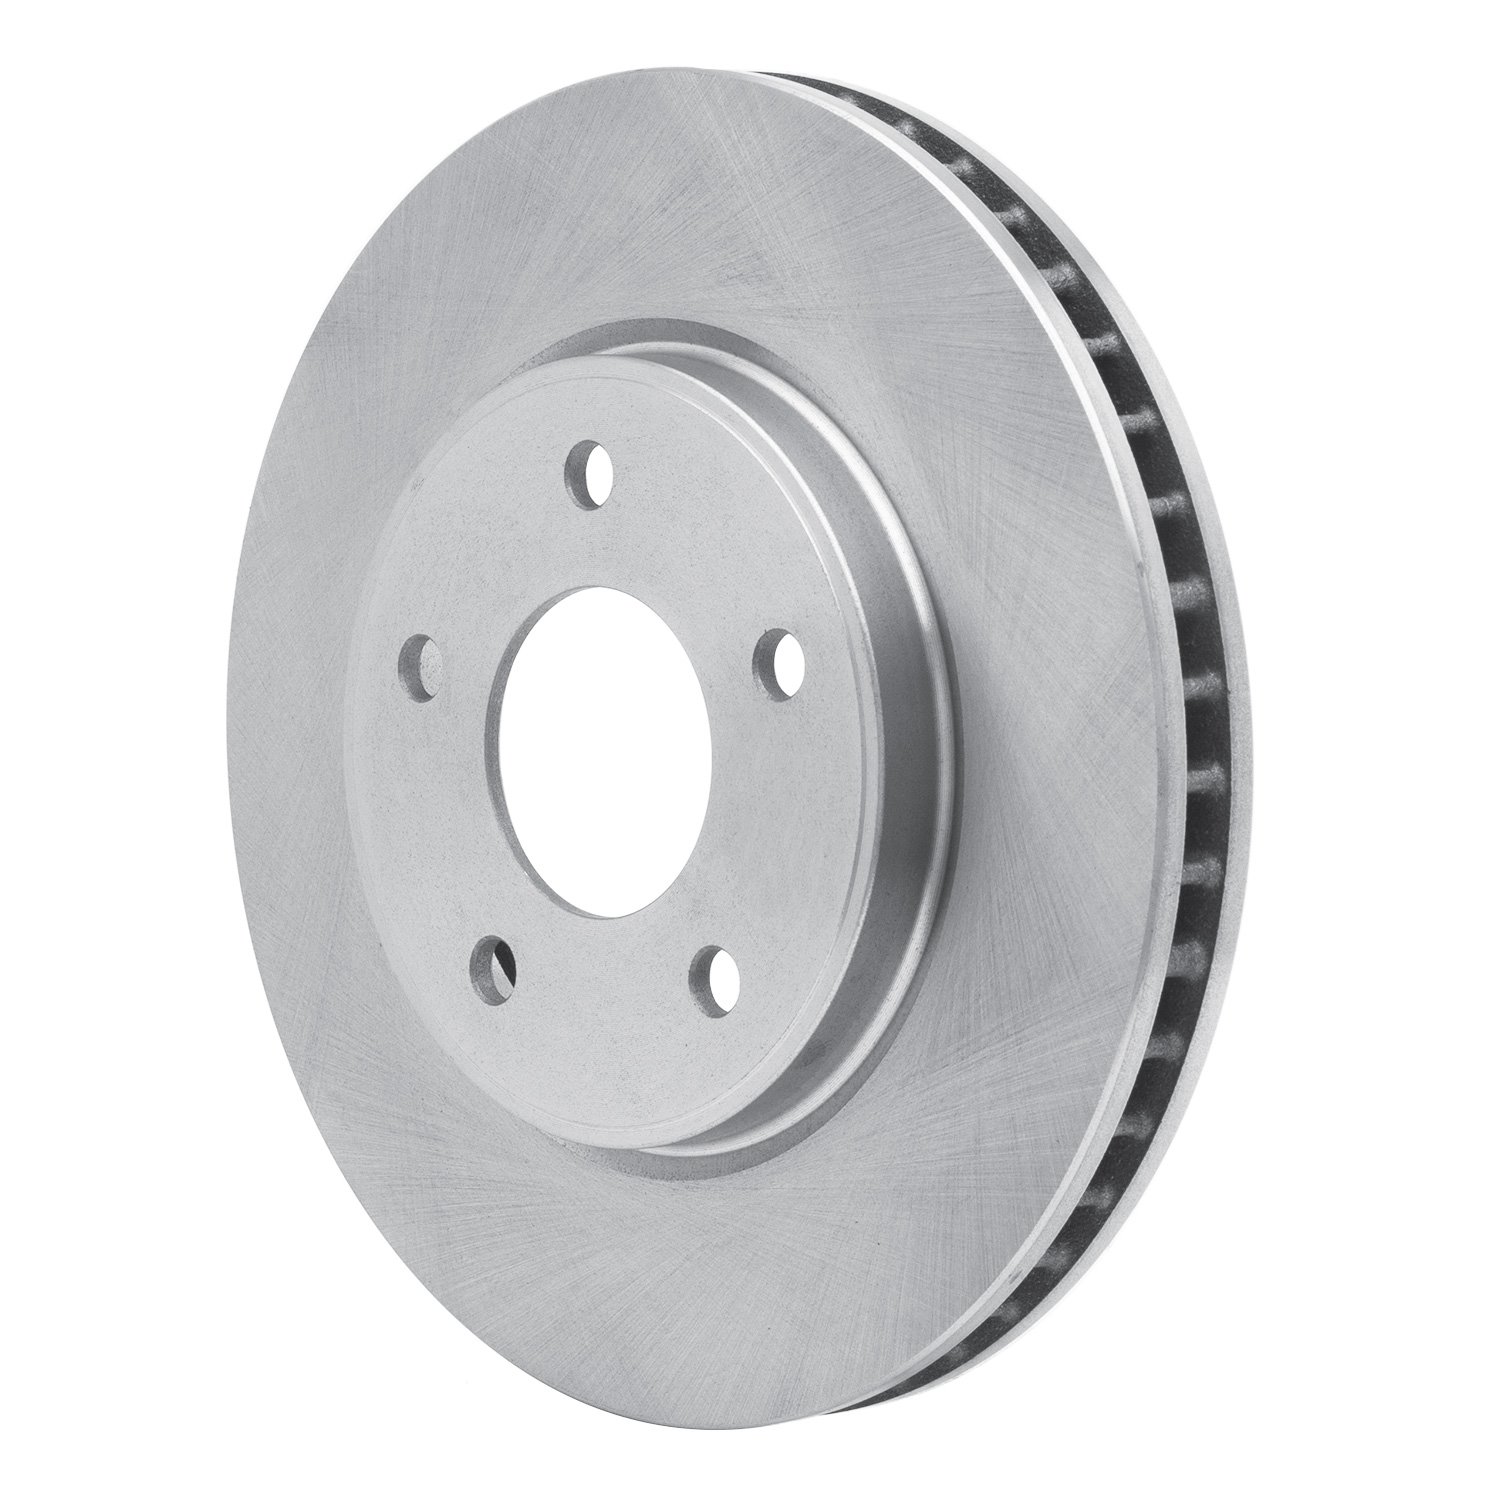 E-Line Blank Brake Rotor, Fits Select Fits Multiple Makes/Models, Position: Front